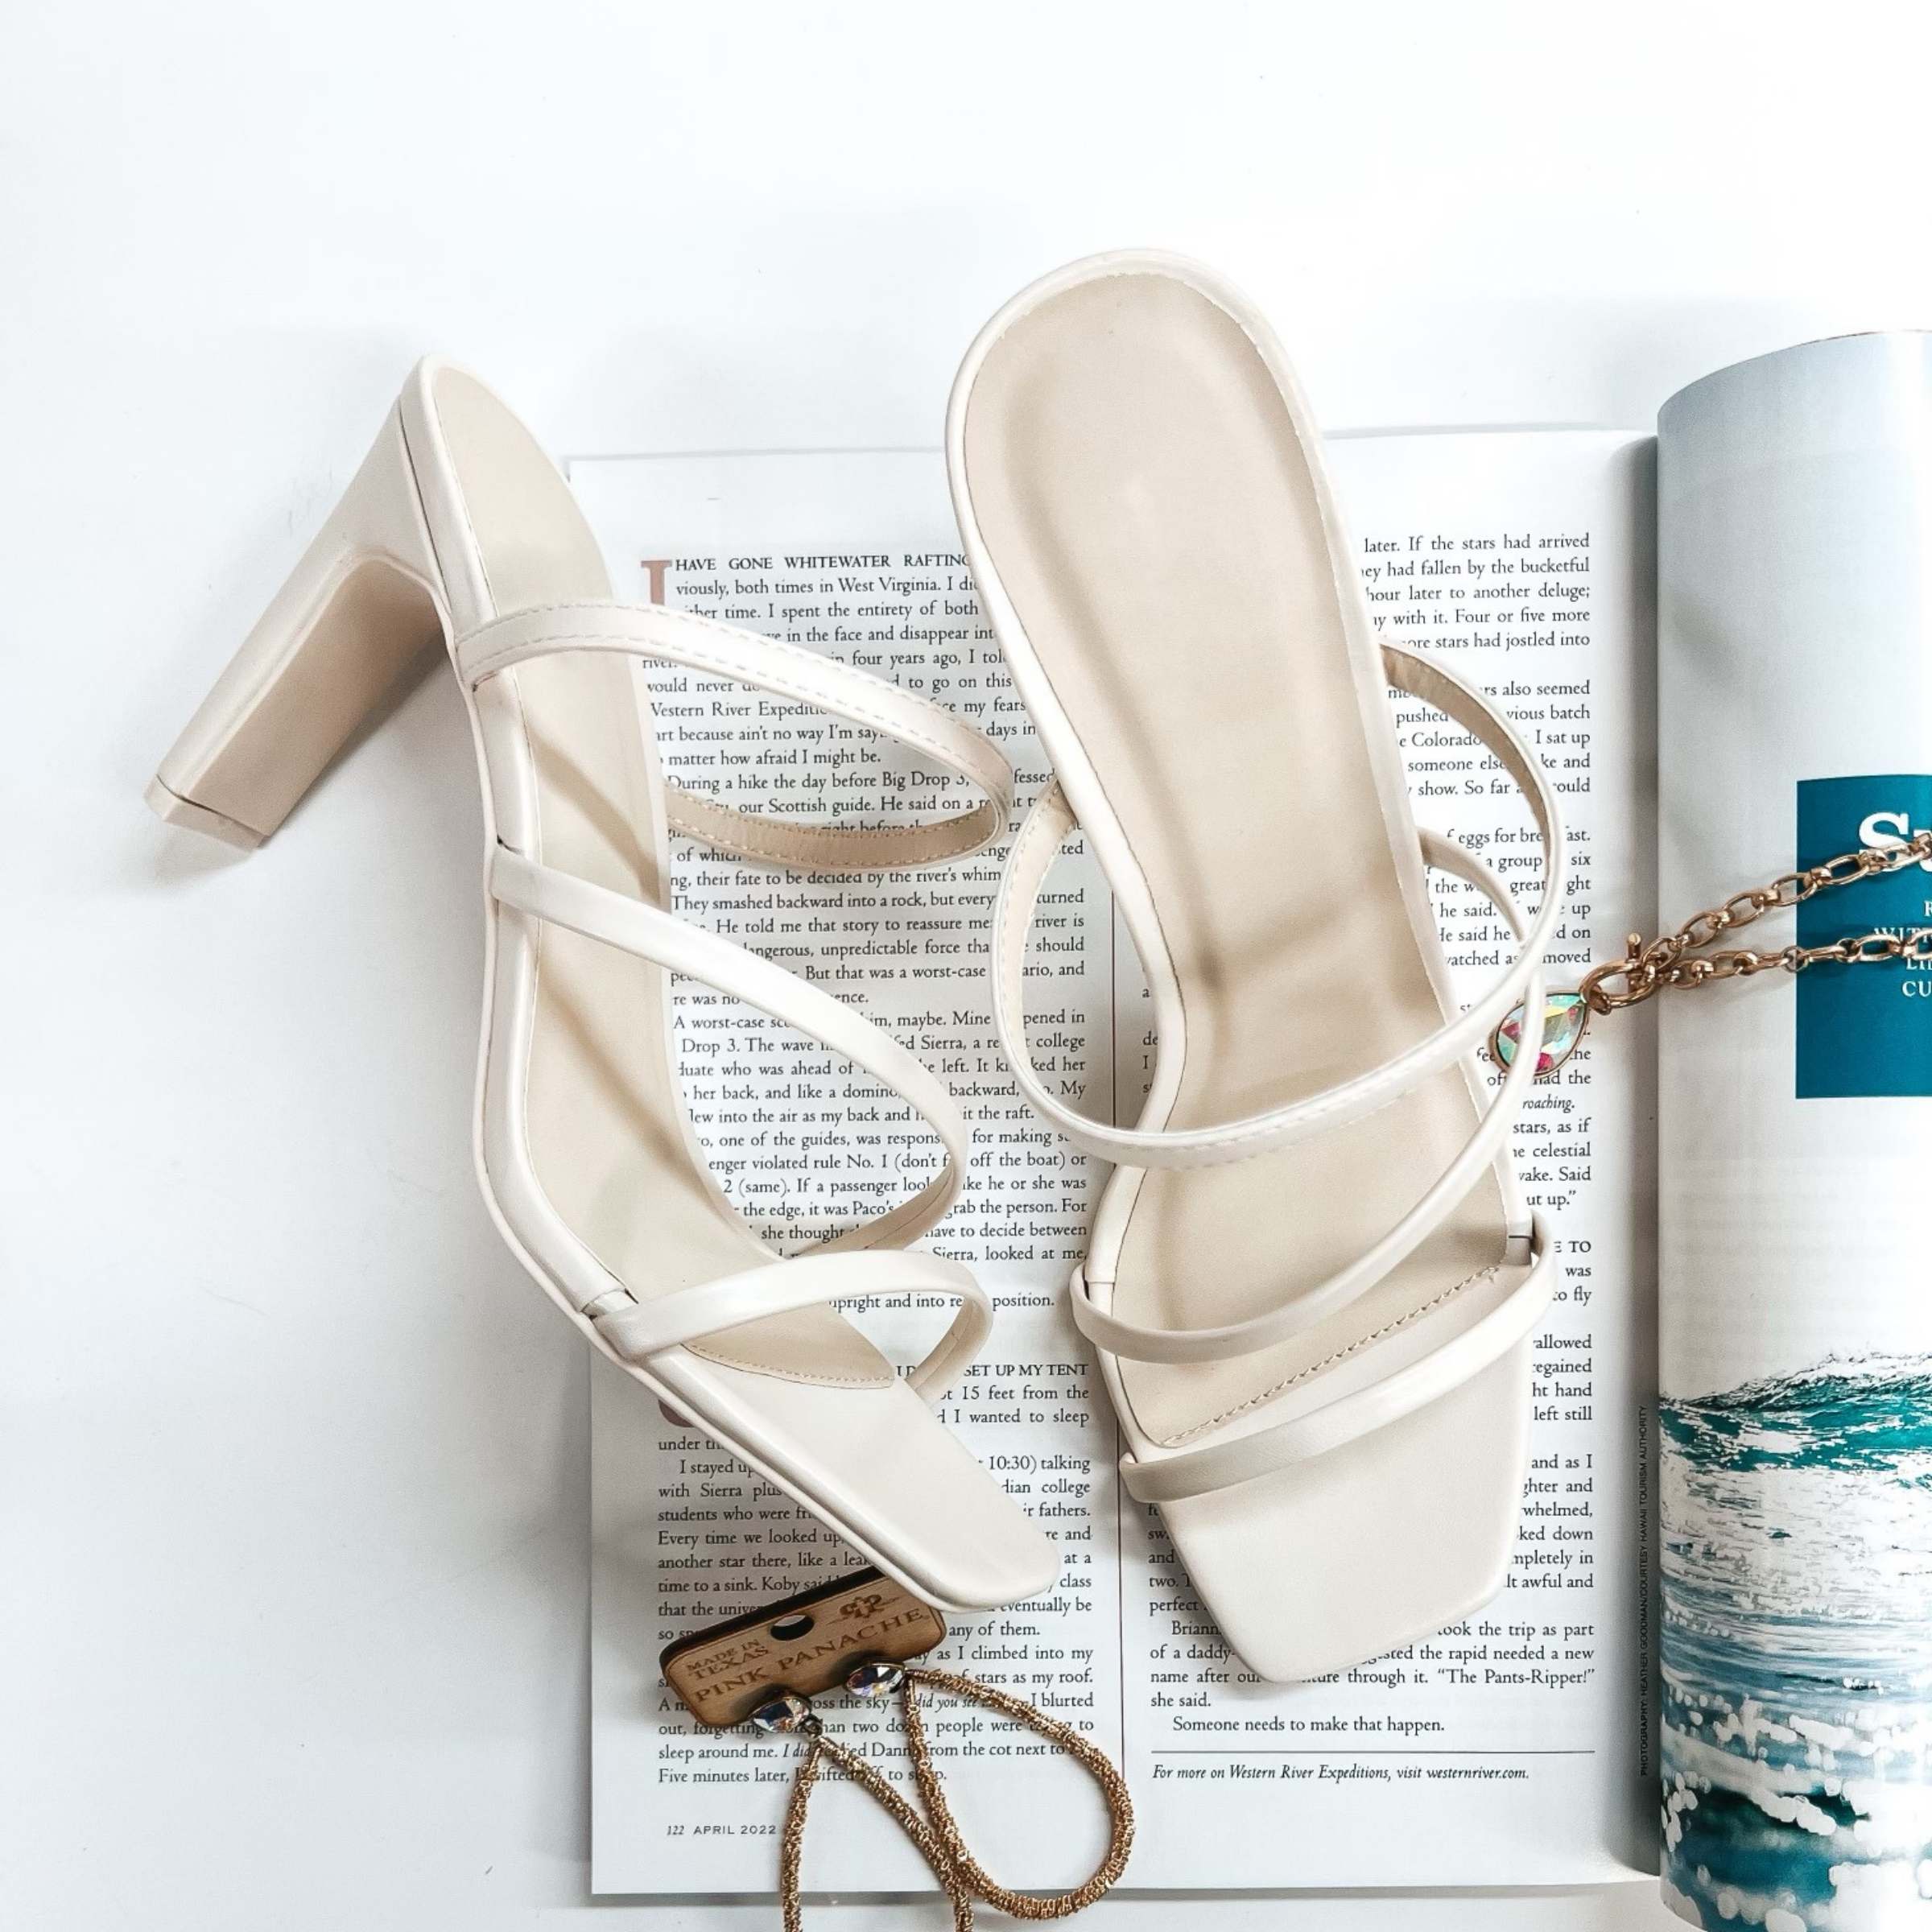 A pair of ivory strappy heels that have a square toe. These shoes are pictured on a white background with gold jewelry and a magazine.